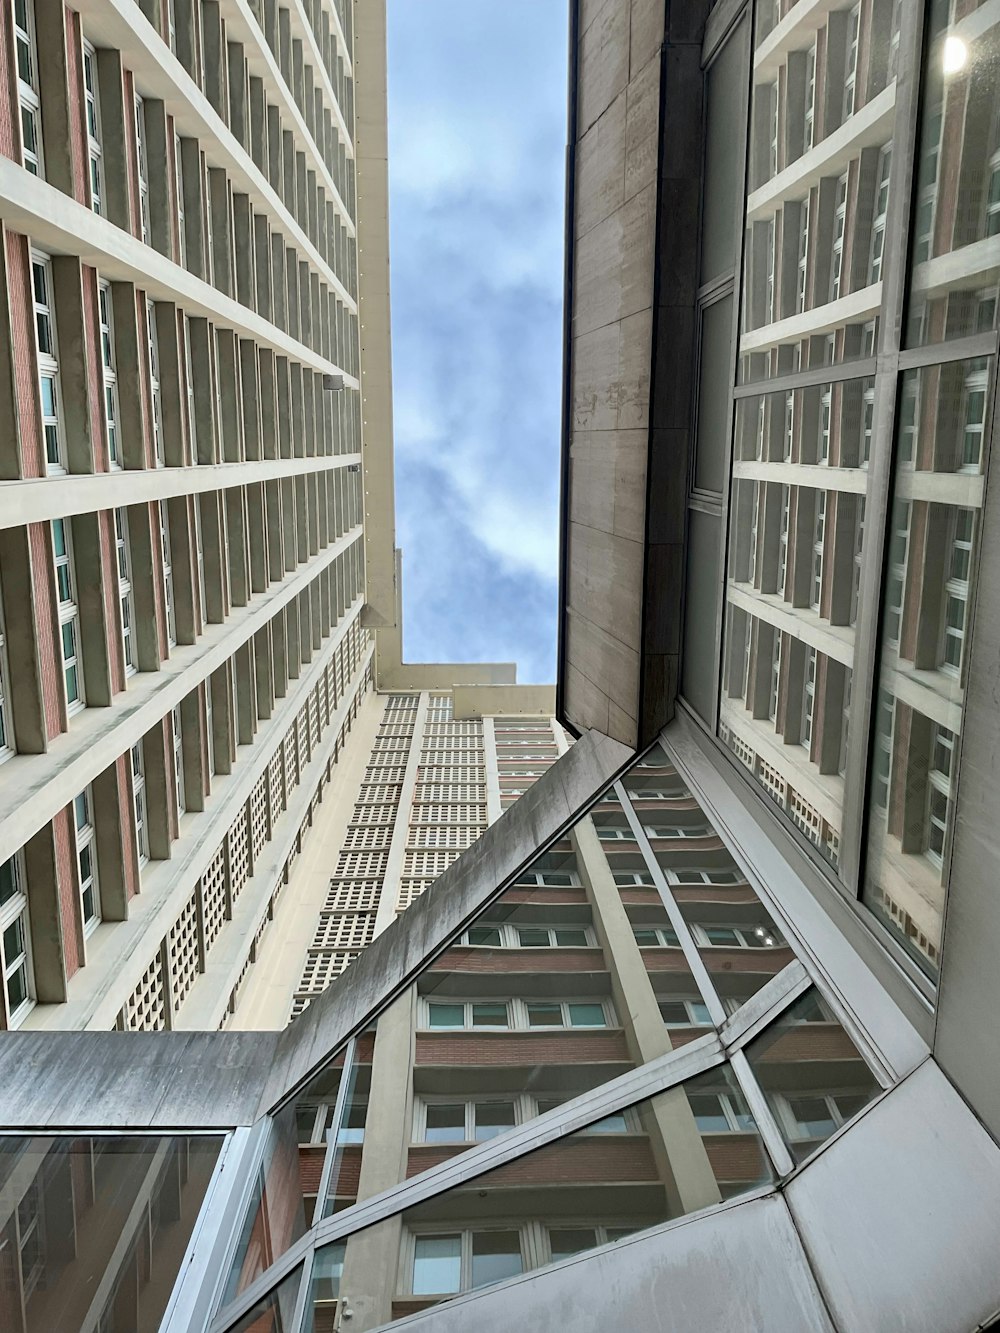 a view of a very tall building from the ground